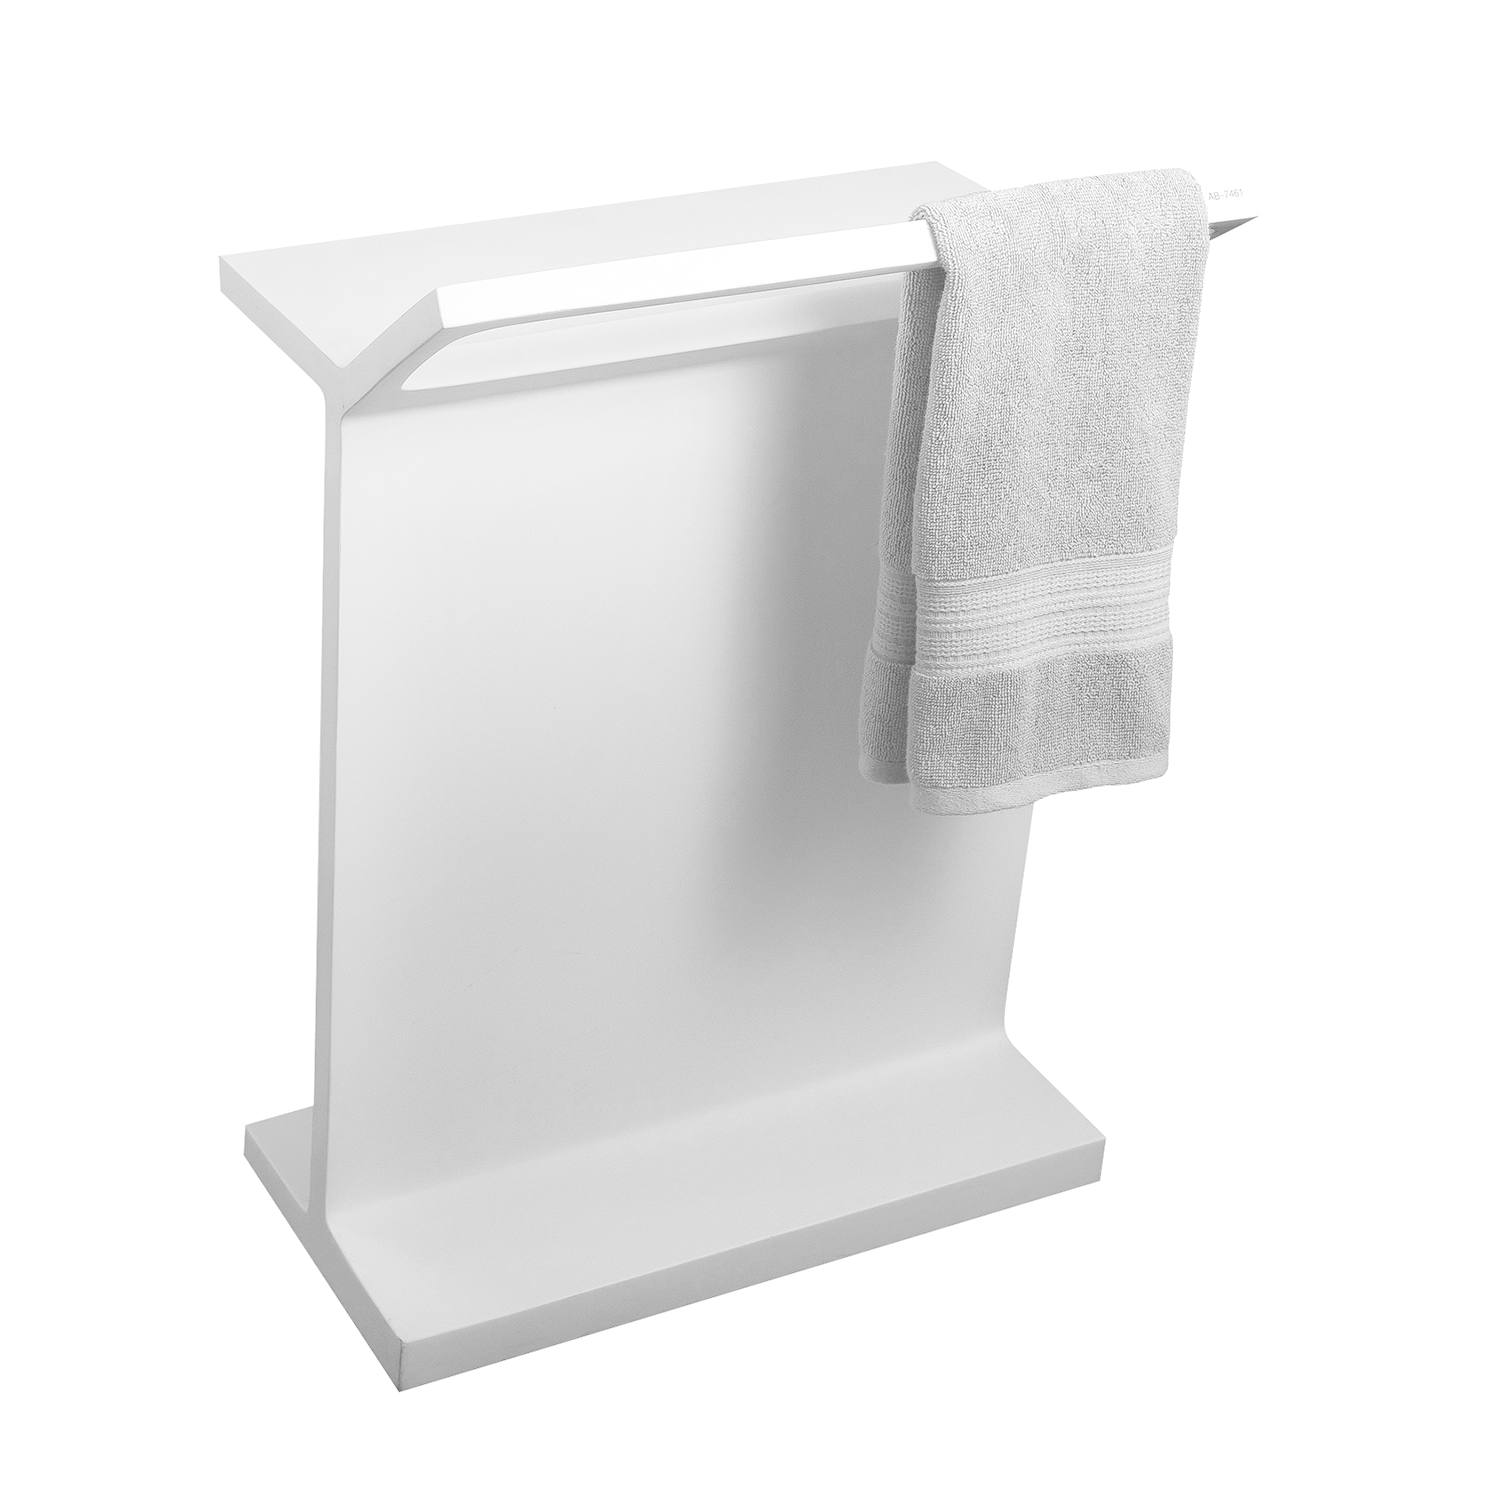 DAX Solid Surface Standing Towel Rack, White, 19-3/4 x 27-1/5 x 12-1/5 Inches (DAX-AB-7461)